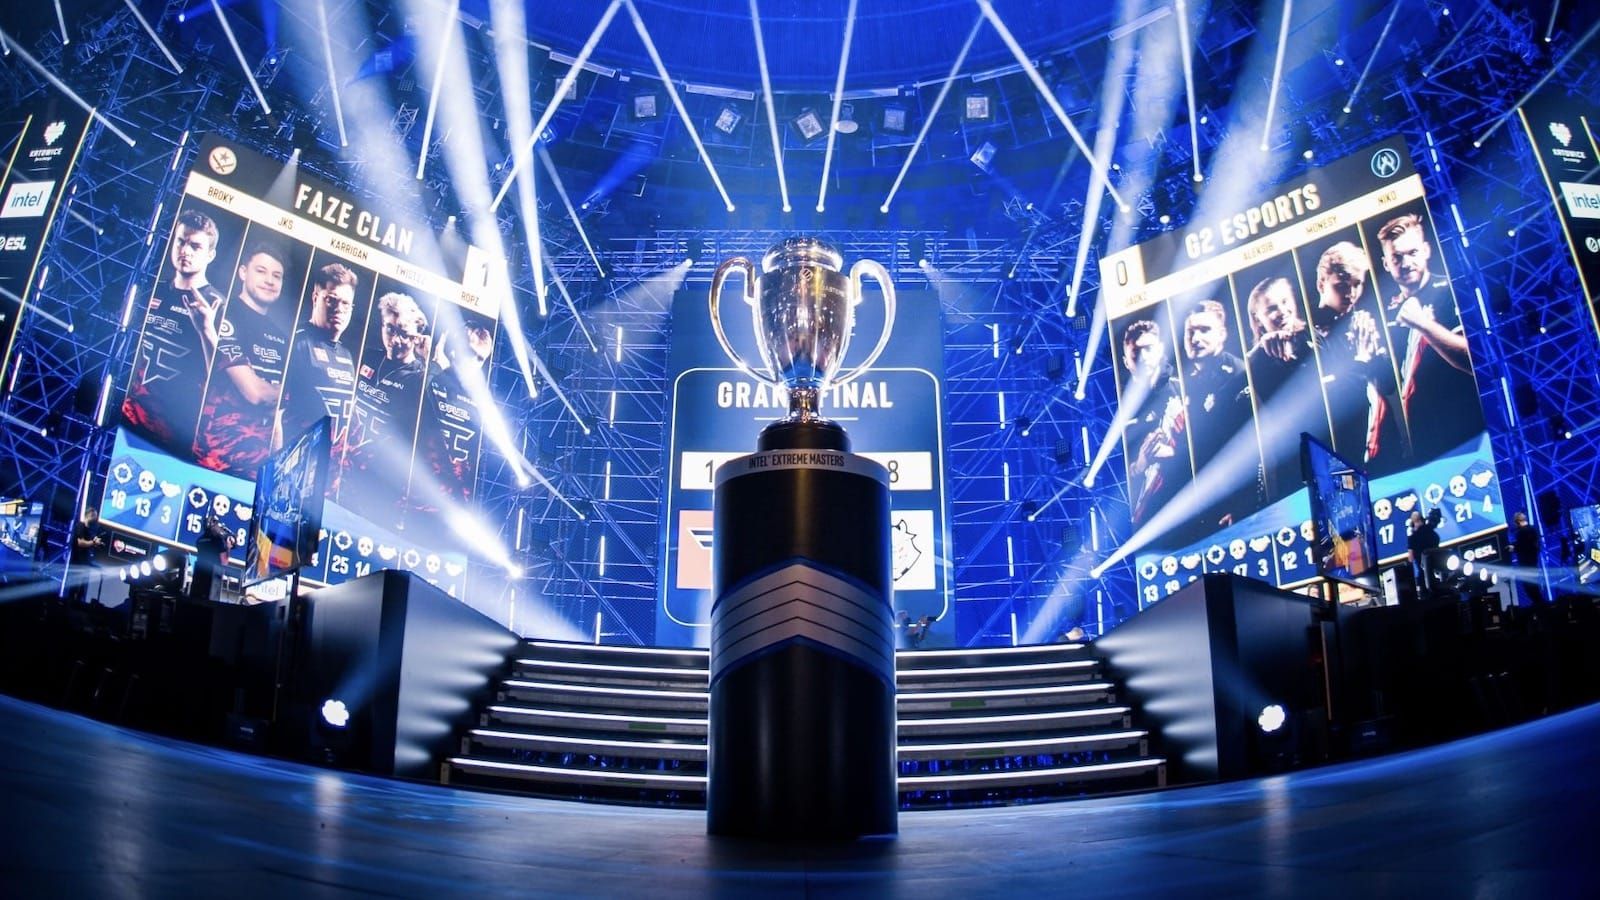 ESL Gaming celebrate 10 years of Intel® Extreme Masters with the